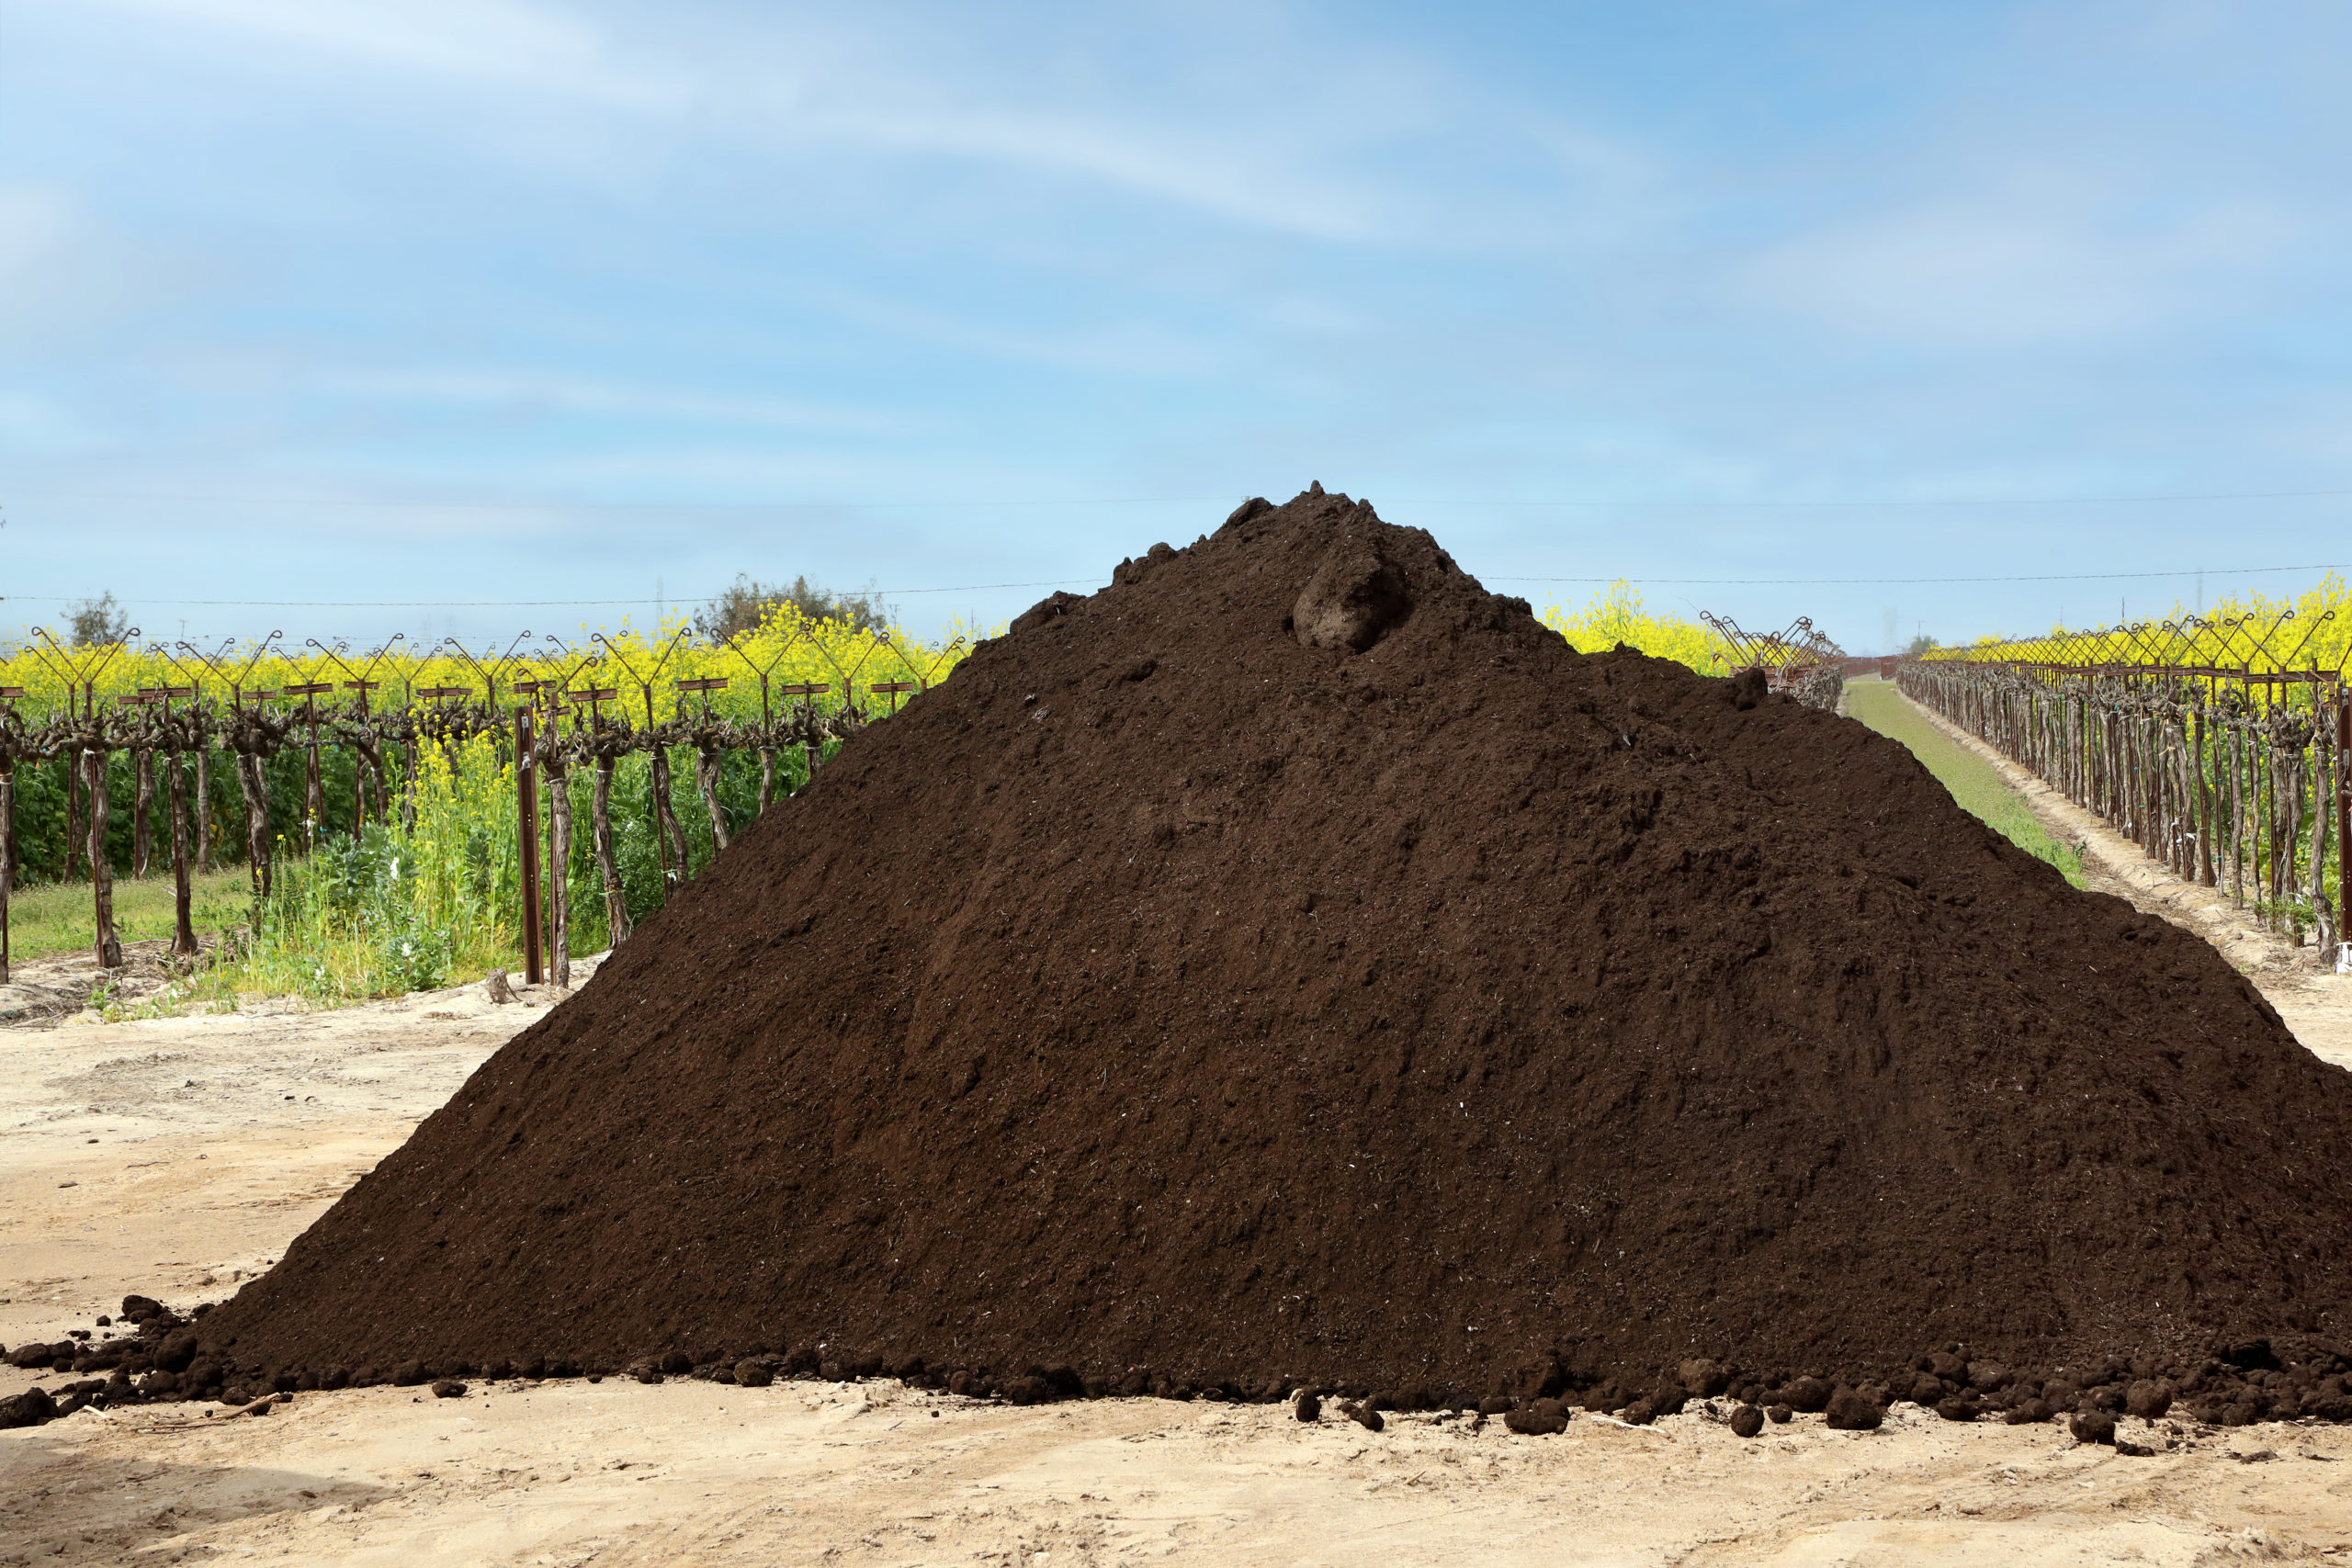 https://www.recology.com/wp-content/uploads/2021/11/REC_COMPOST_6918F-scaled.jpg